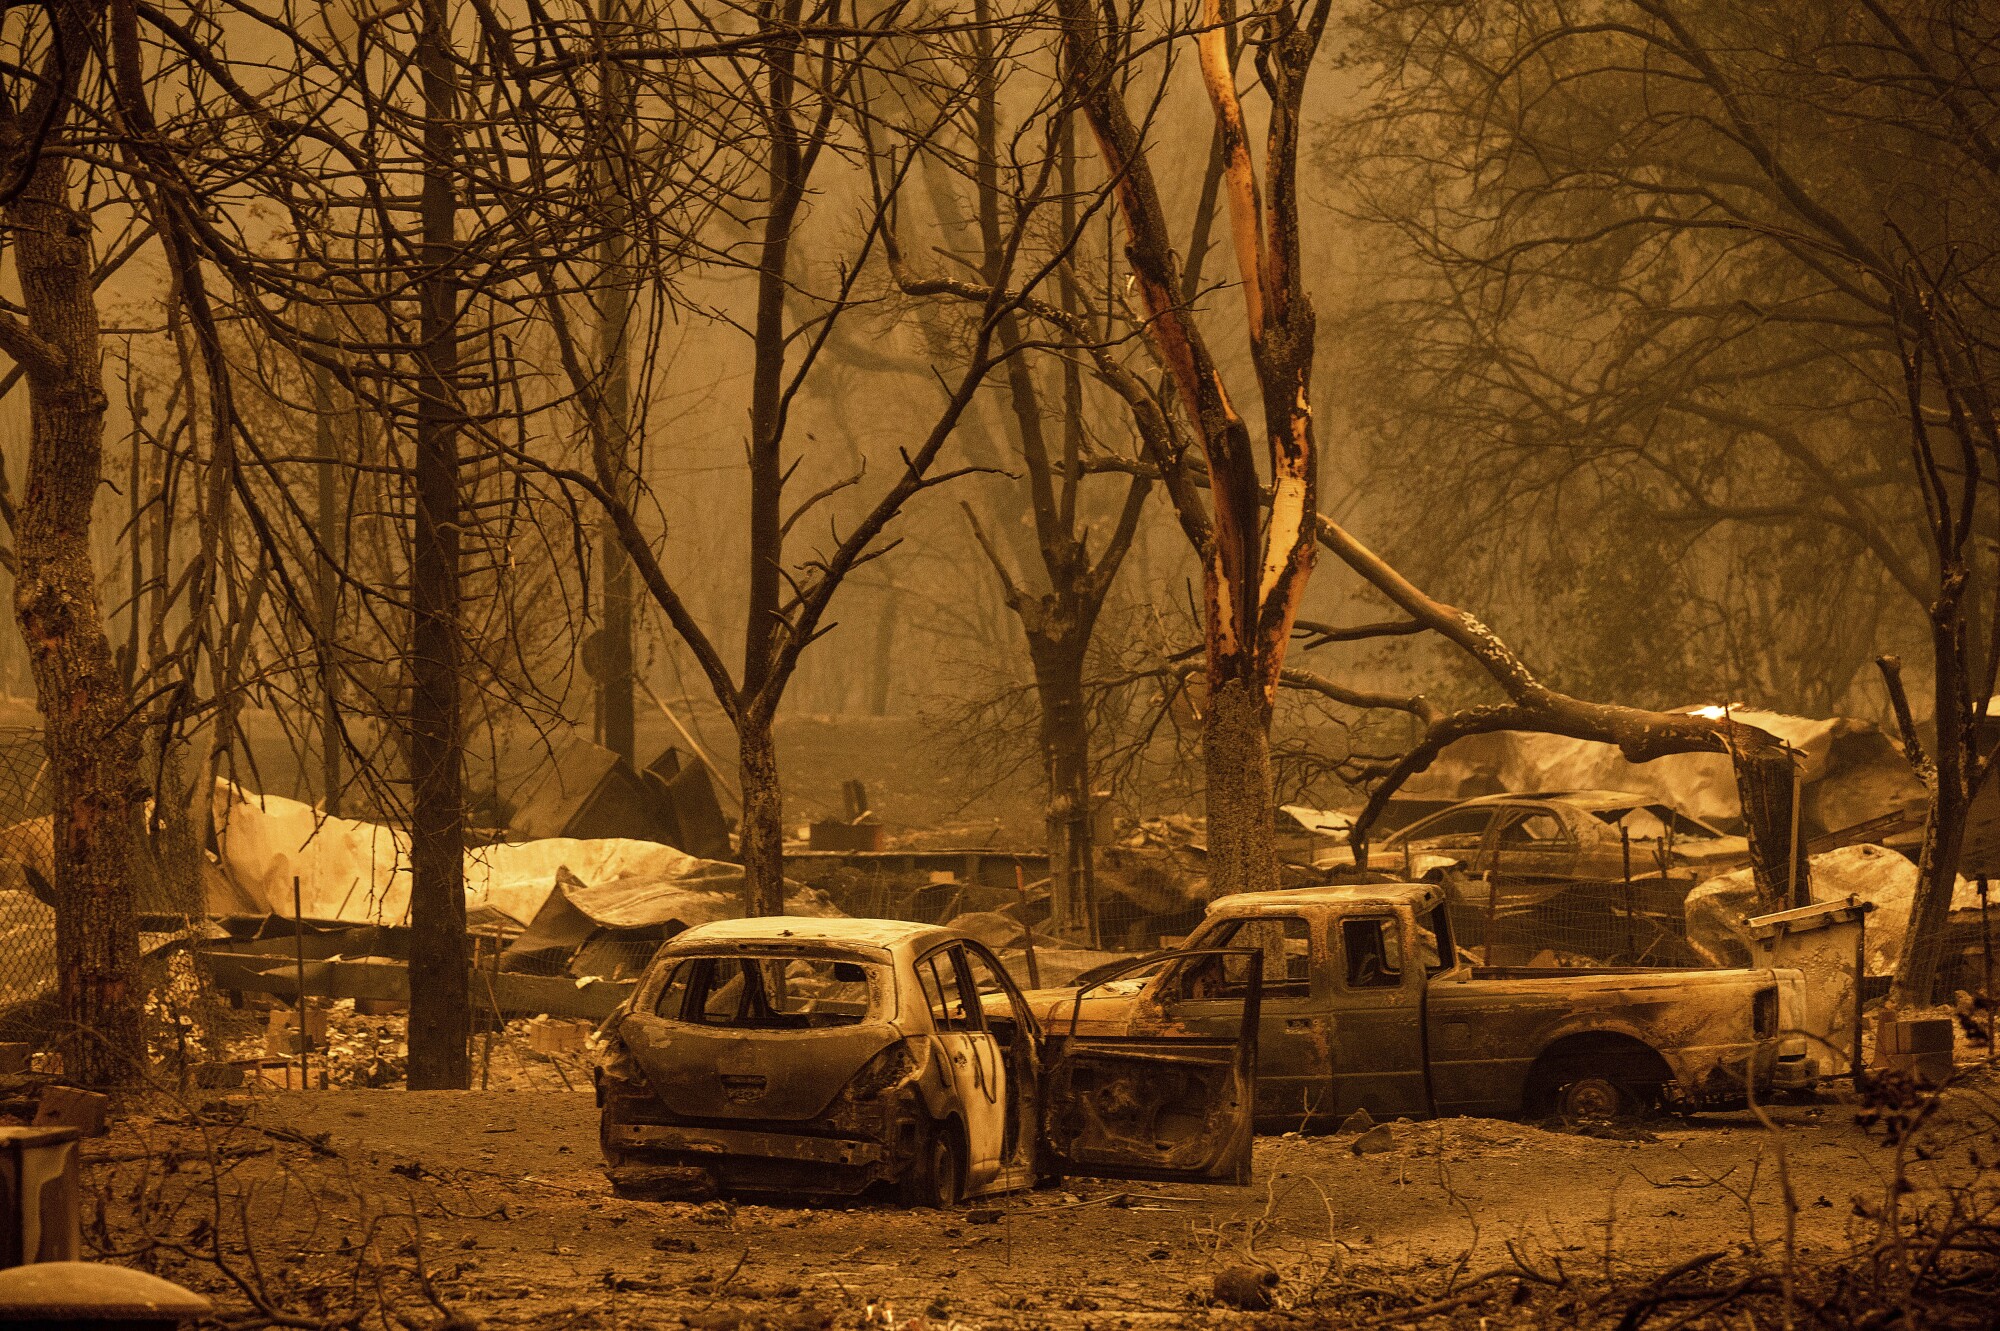 Charred residences and vehicles sit amid burnt trees and smoke.